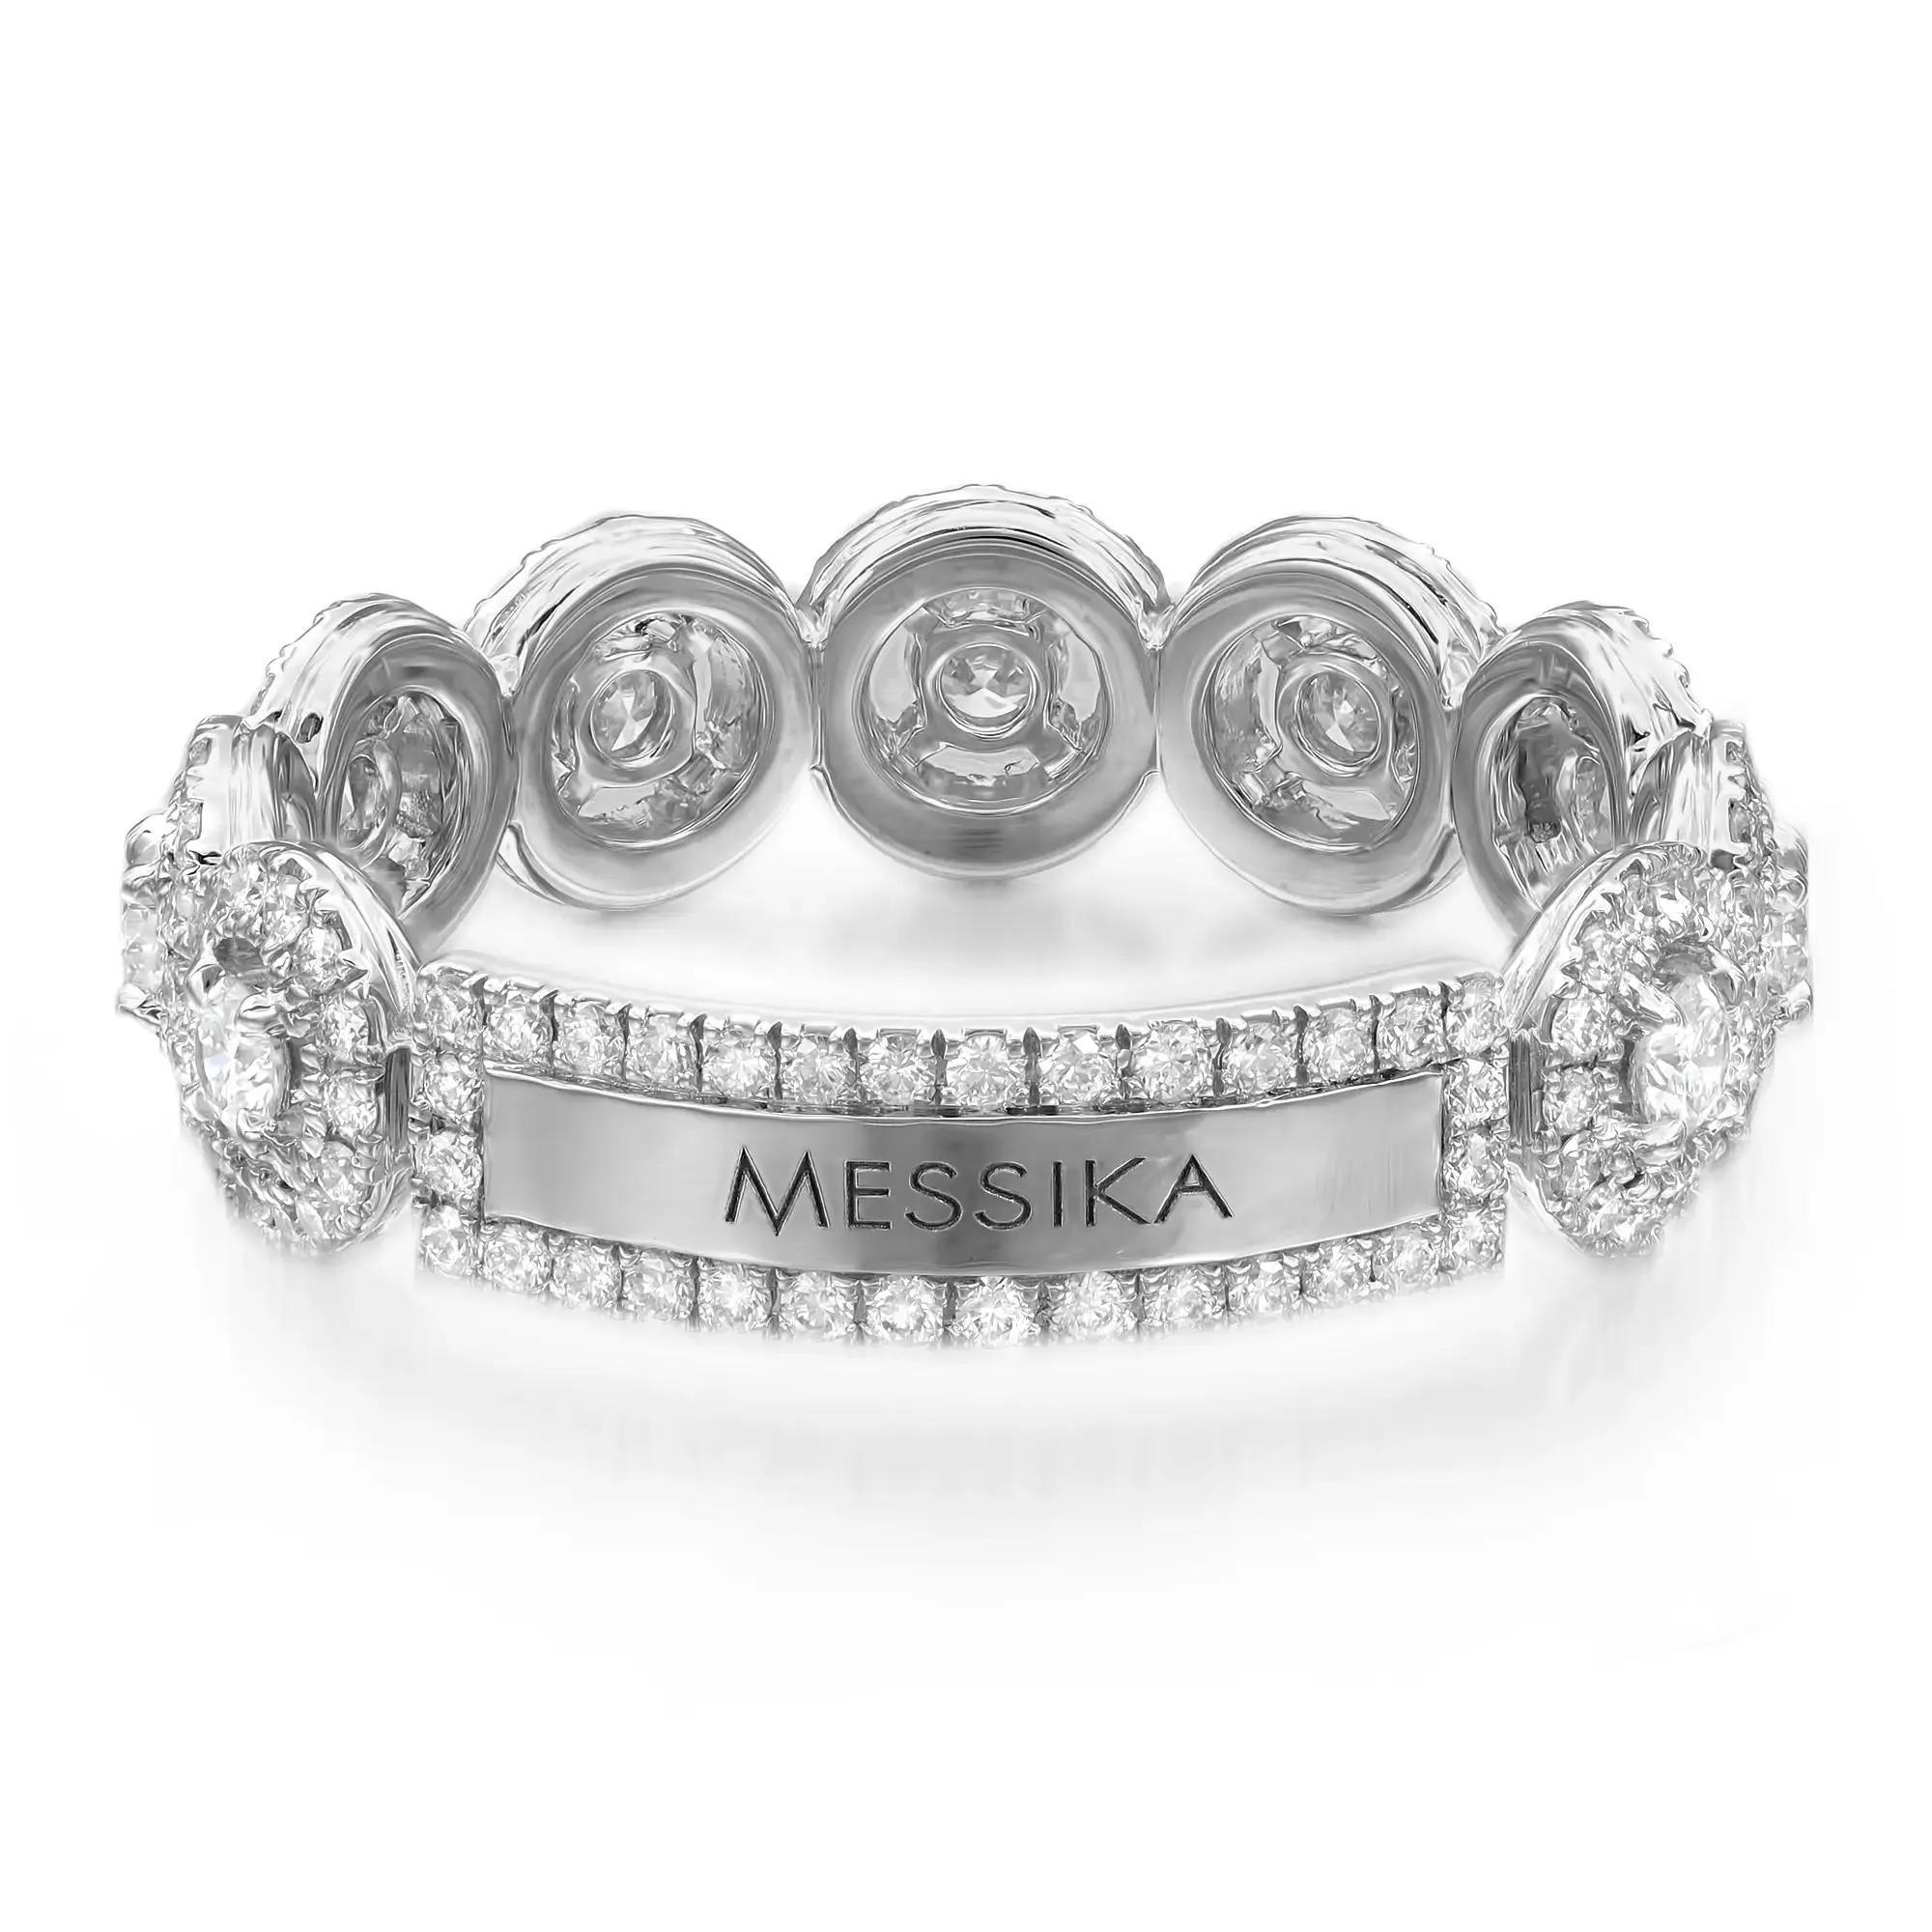 Walk with grace with this sparkling Messika All Joy diamond ring. Crafted in 18K White Gold, it features prong set round brilliant cut diamonds in the center accented with diamond halo. Total diamond weight: 0.87 carat. Diamond quality: color G and